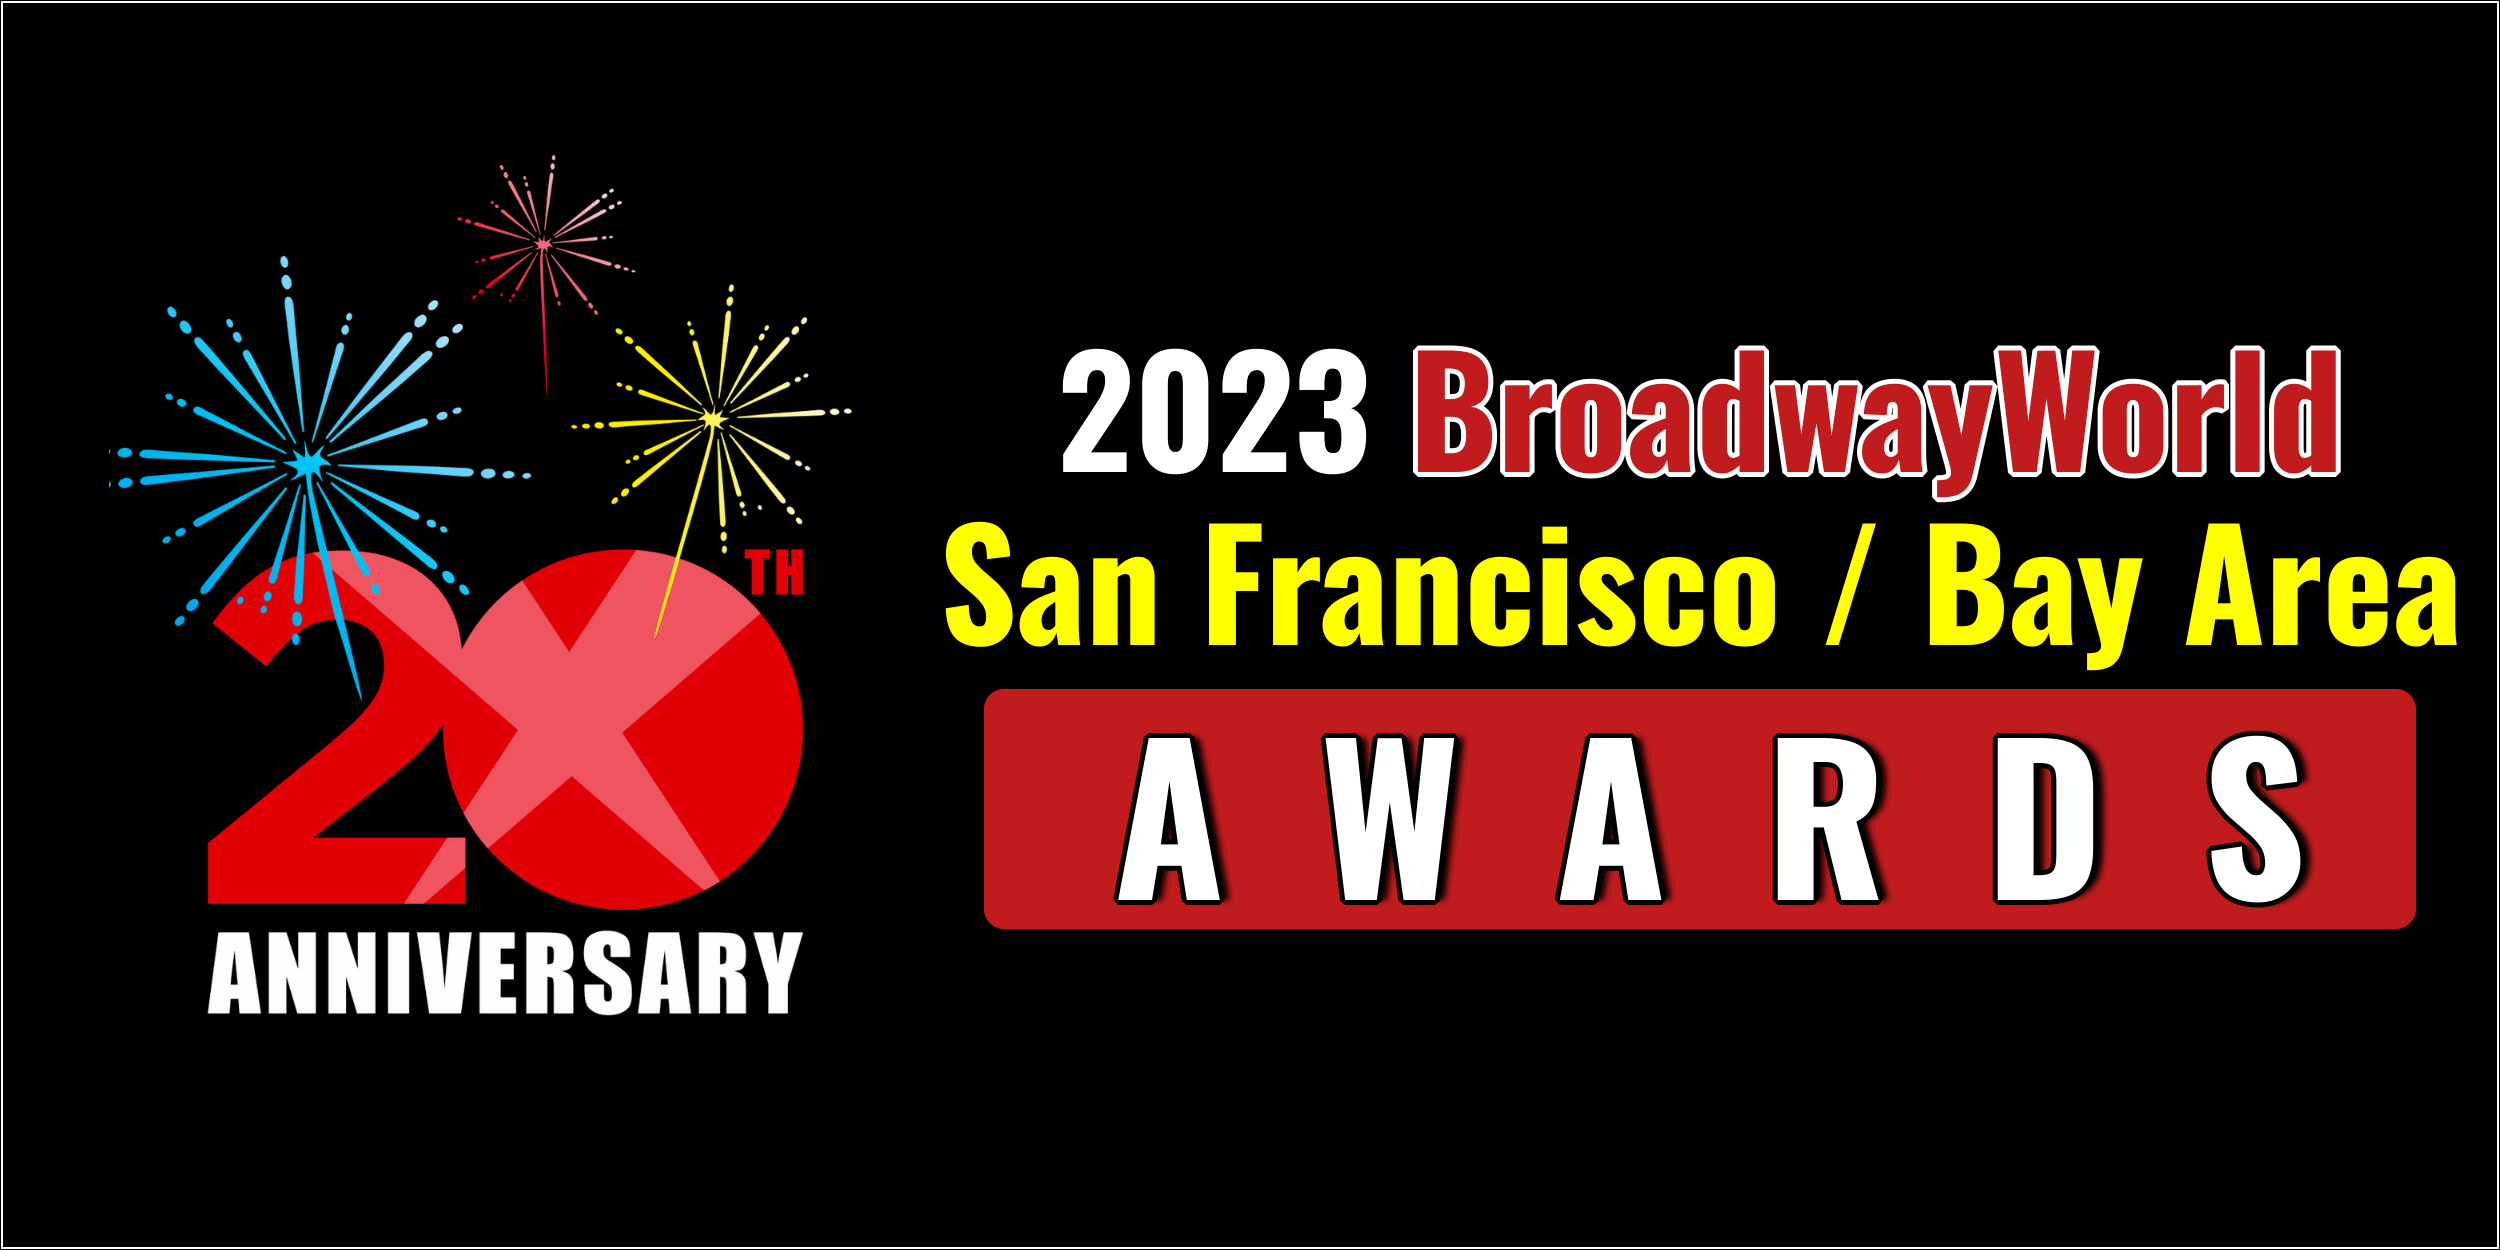 BroadwayWorld San Francisco / Bay Area Awards December 5th Standings; The DROWSY CHAPERONE Leads Best Musical! 